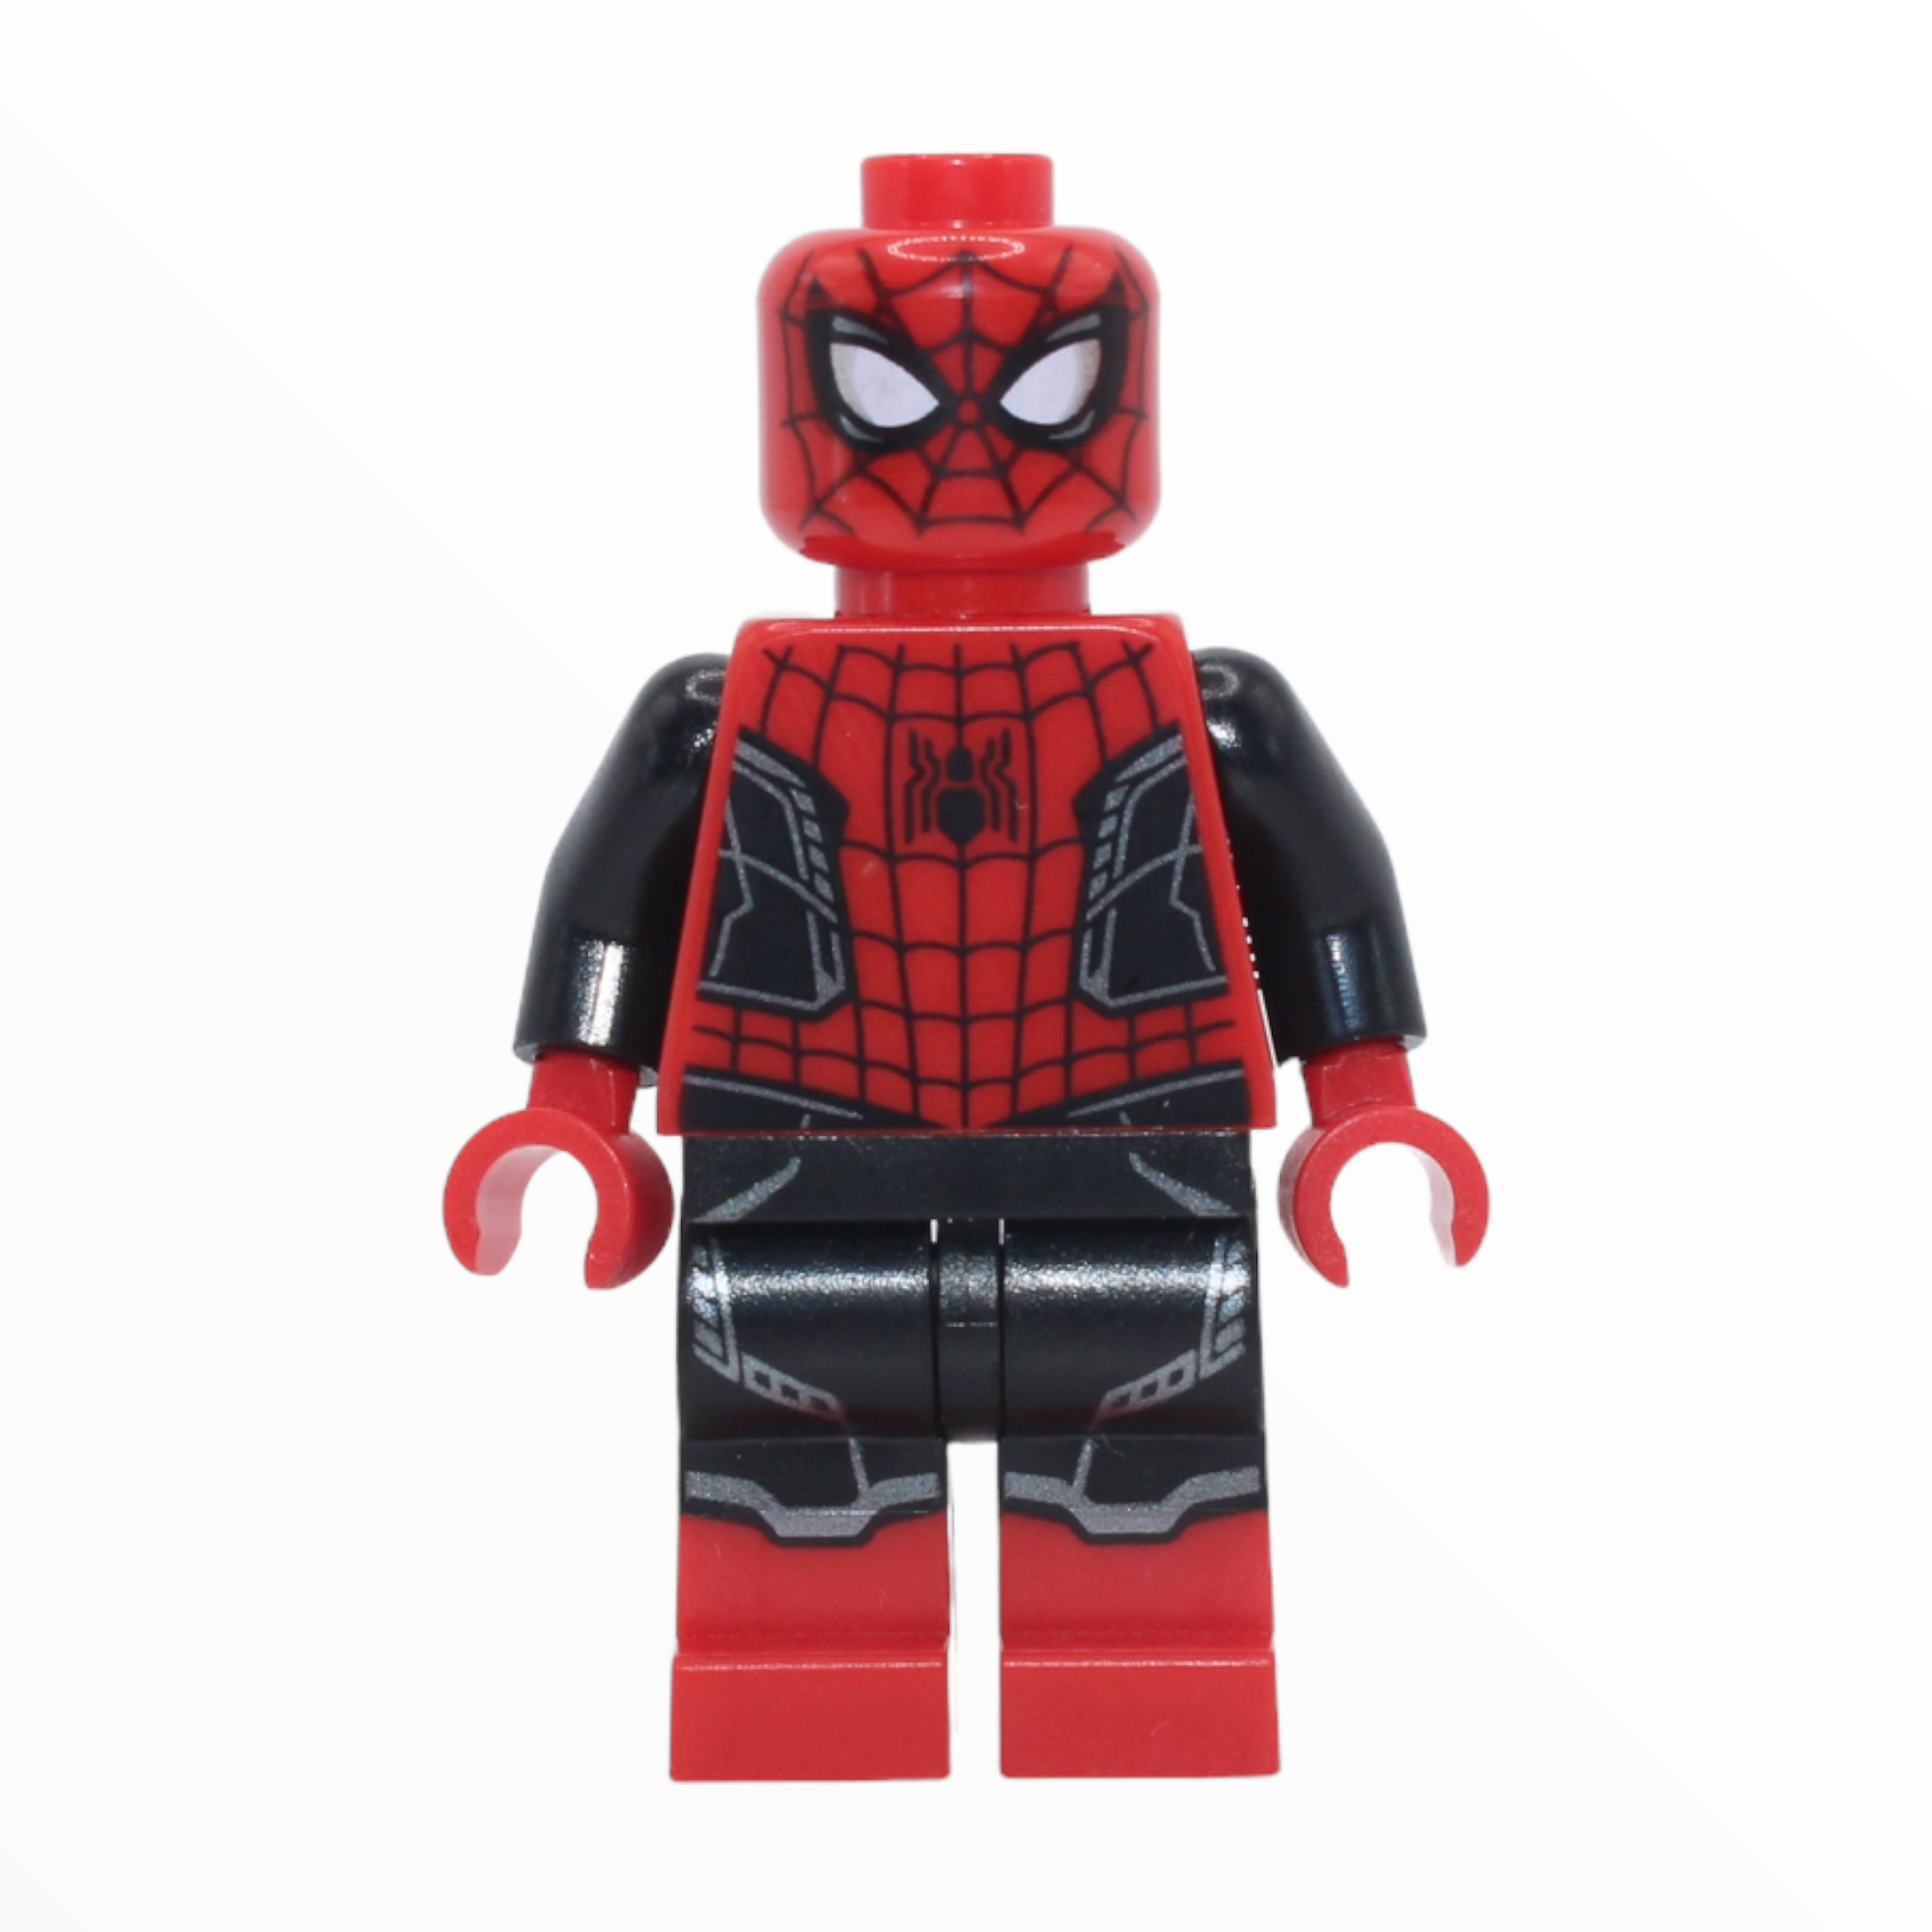 Spider-Man (Far From Home, Upgraded Suit, red and black outfit)